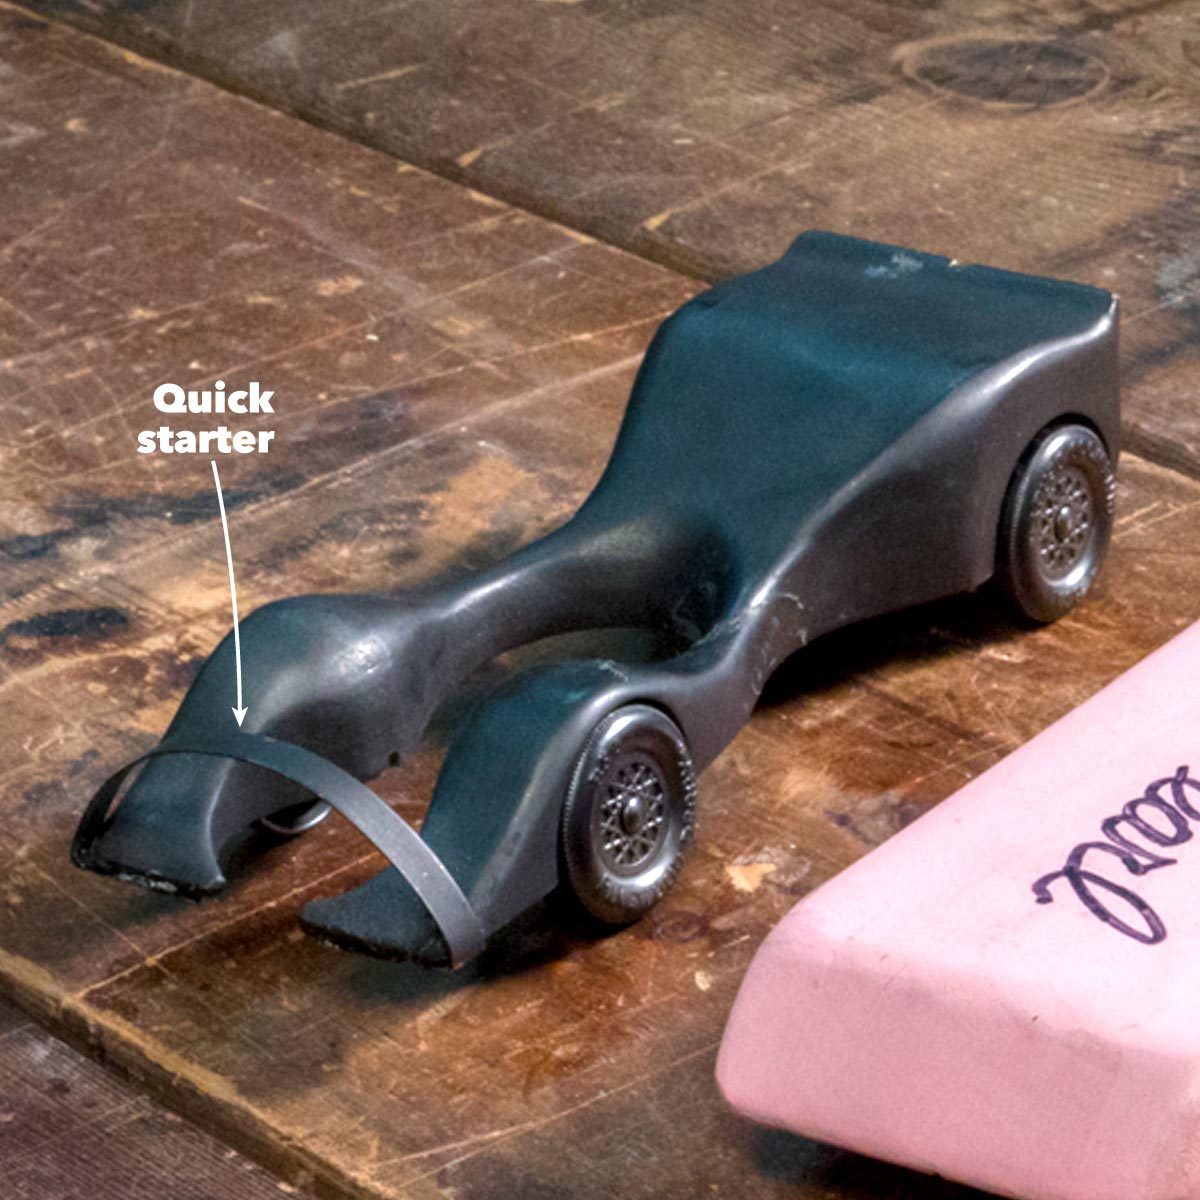 Wedge Pinewood Derby Car Complete Kit